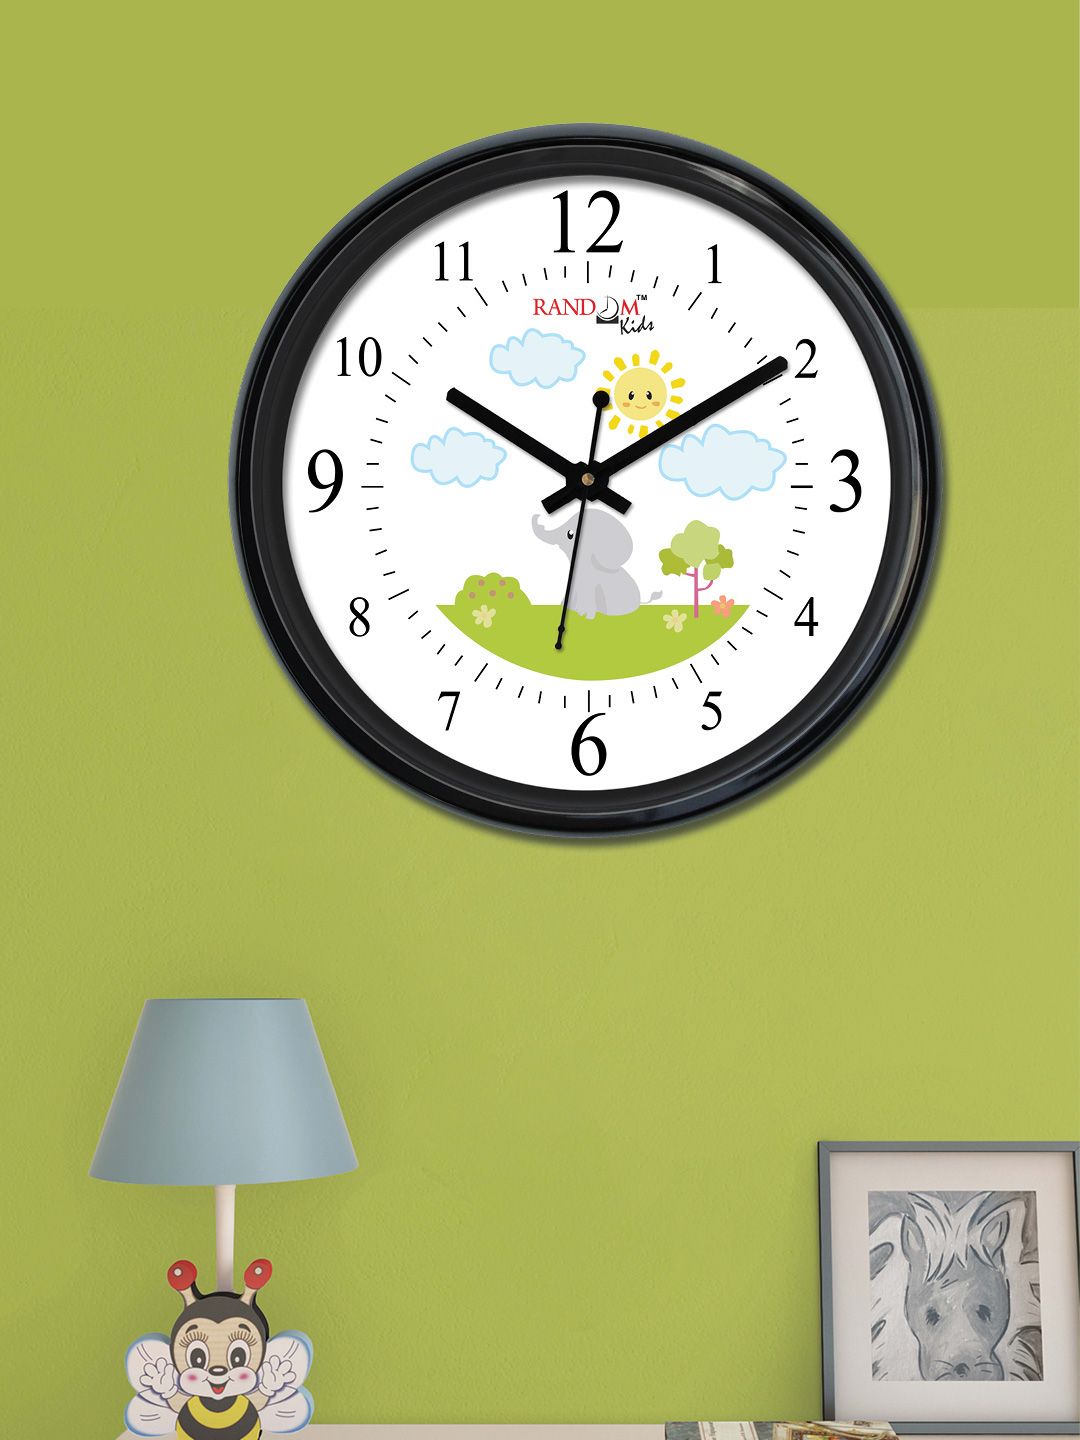 RANDOM White & Green Round Printed 30 cm Analogue Wall Clock Price in India